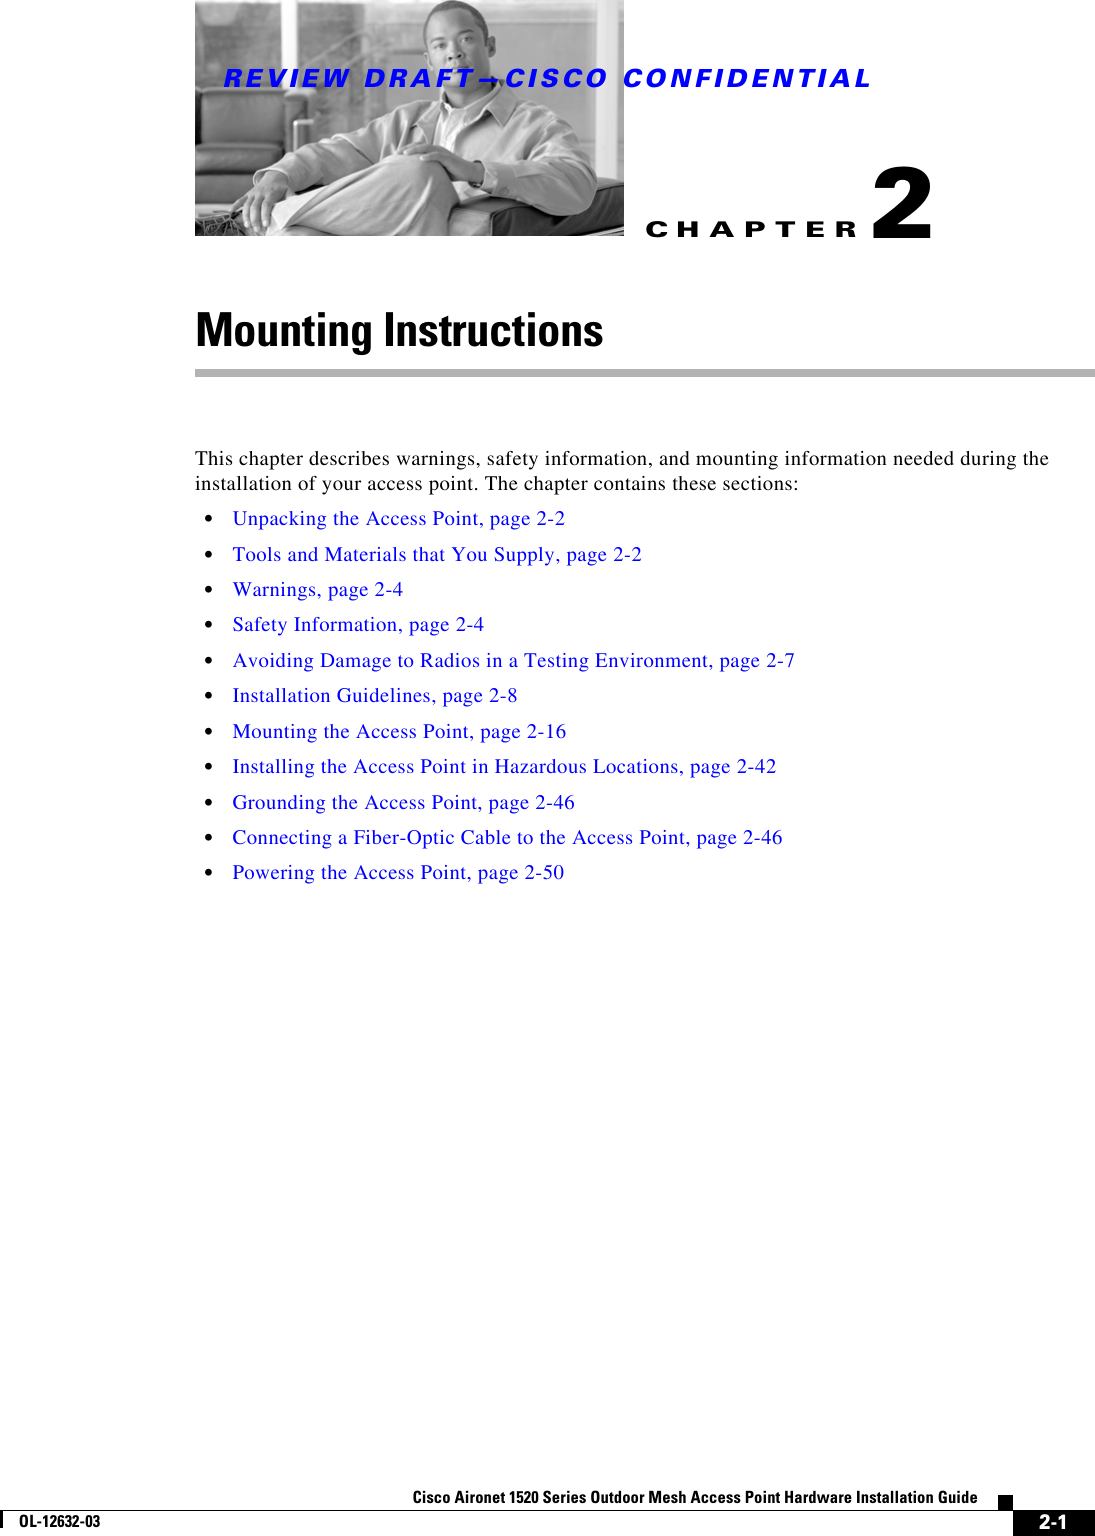 CHAPTERREVIEW DRAFT—CISCO CONFIDENTIAL2-1Cisco Aironet 1520 Series Outdoor Mesh Access Point Hardware Installation GuideOL-12632-032Mounting InstructionsThis chapter describes warnings, safety information, and mounting information needed during the installation of your access point. The chapter contains these sections:  • Unpacking the Access Point, page 2-2  • Tools and Materials that You Supply, page 2-2  • Warnings, page 2-4  • Safety Information, page 2-4  • Avoiding Damage to Radios in a Testing Environment, page 2-7  • Installation Guidelines, page 2-8  • Mounting the Access Point, page 2-16  • Installing the Access Point in Hazardous Locations, page 2-42  • Grounding the Access Point, page 2-46  • Connecting a Fiber-Optic Cable to the Access Point, page 2-46  • Powering the Access Point, page 2-50